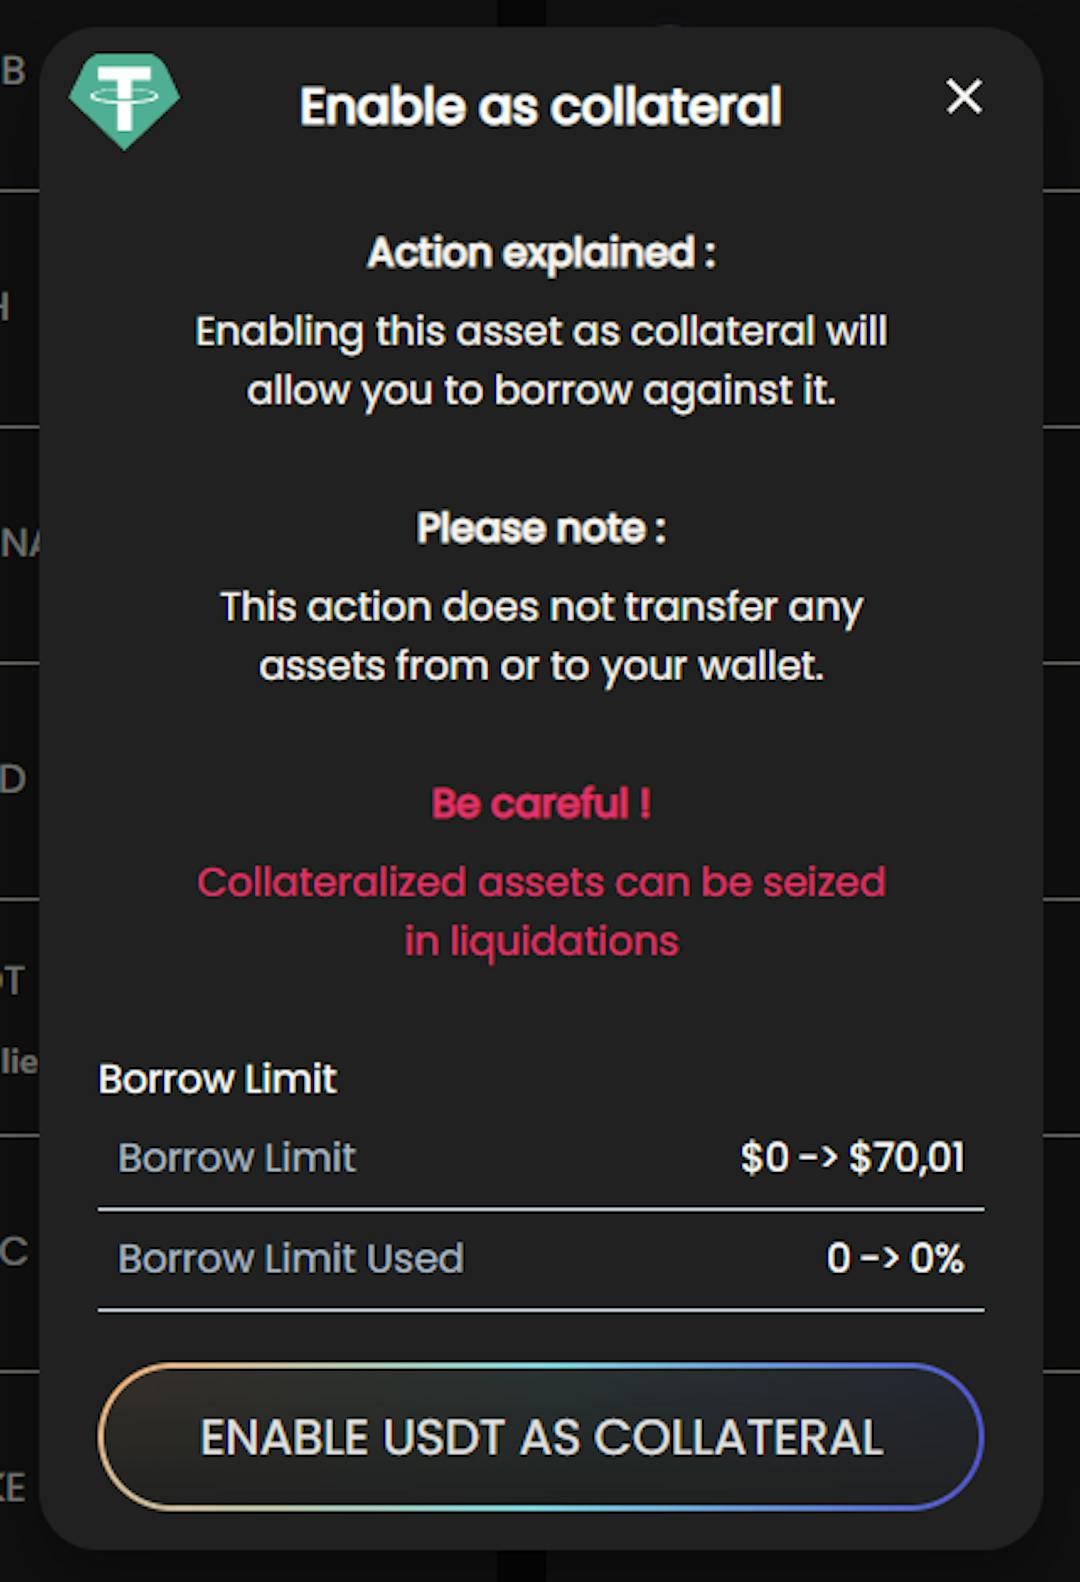 Warning popup for enabling assets as collateral